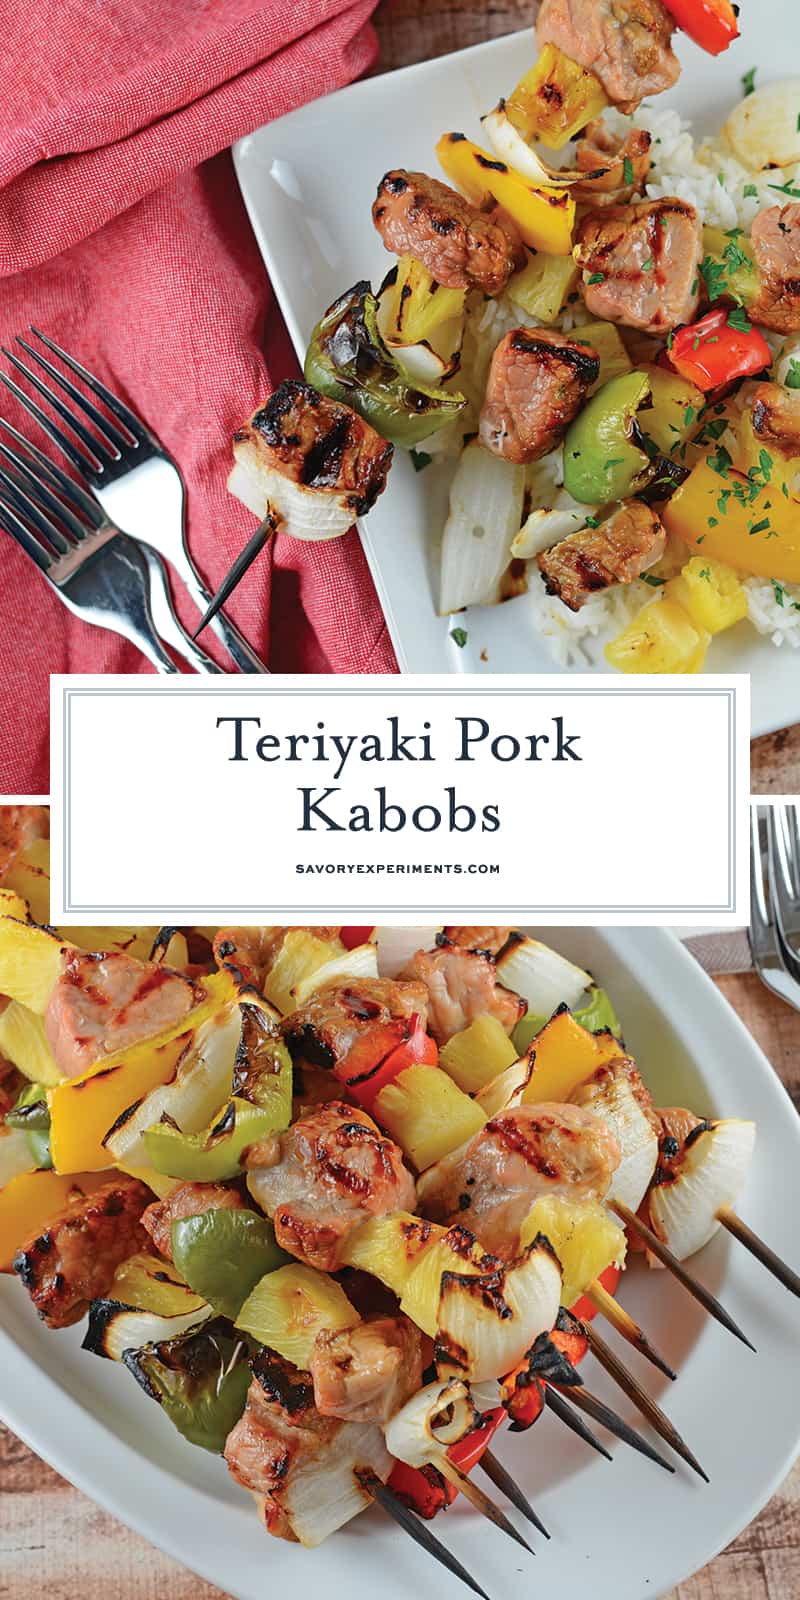 Teriyaki Pork Kabobs are an easy kabob recipe using marinated pork tenderloin paired with pineapple, bell pepper and sweet onion. Ready in 30 minutes! #teriyakipork #kabobrecipes www.savoryexperiments.com